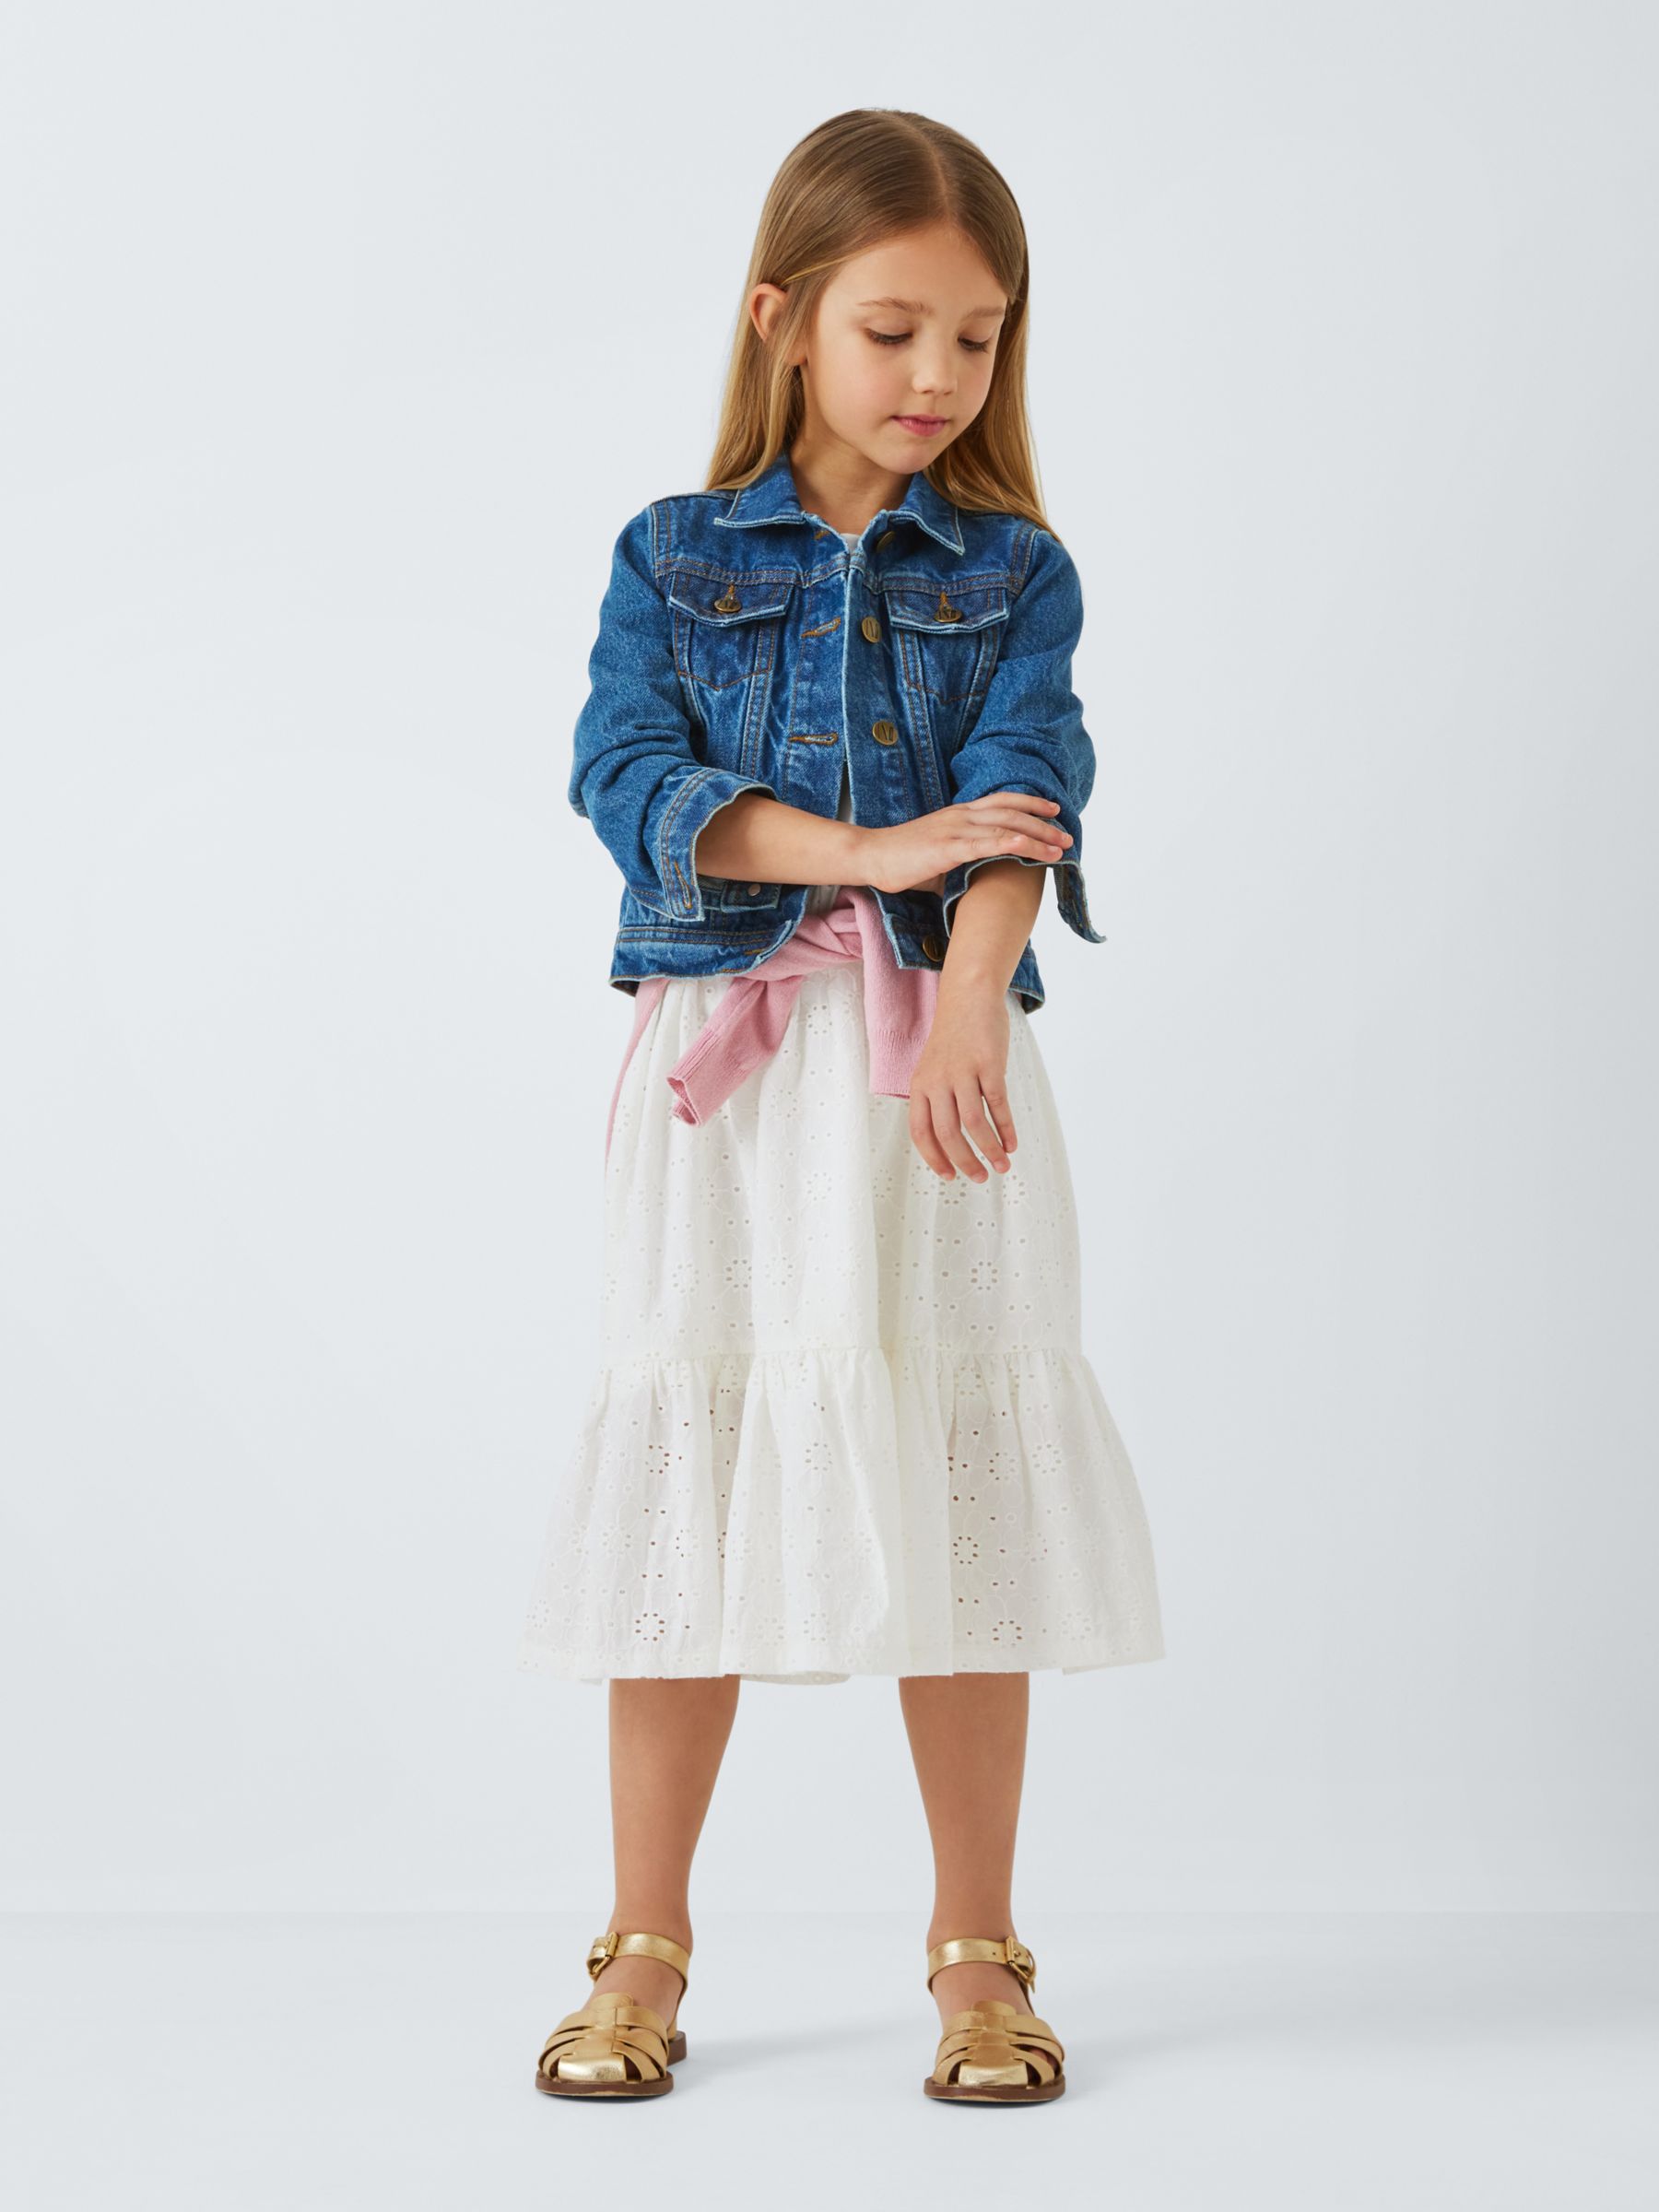 John Lewis Kids' Broderie Anglaise Tiered Dress, Snow White, 12 years